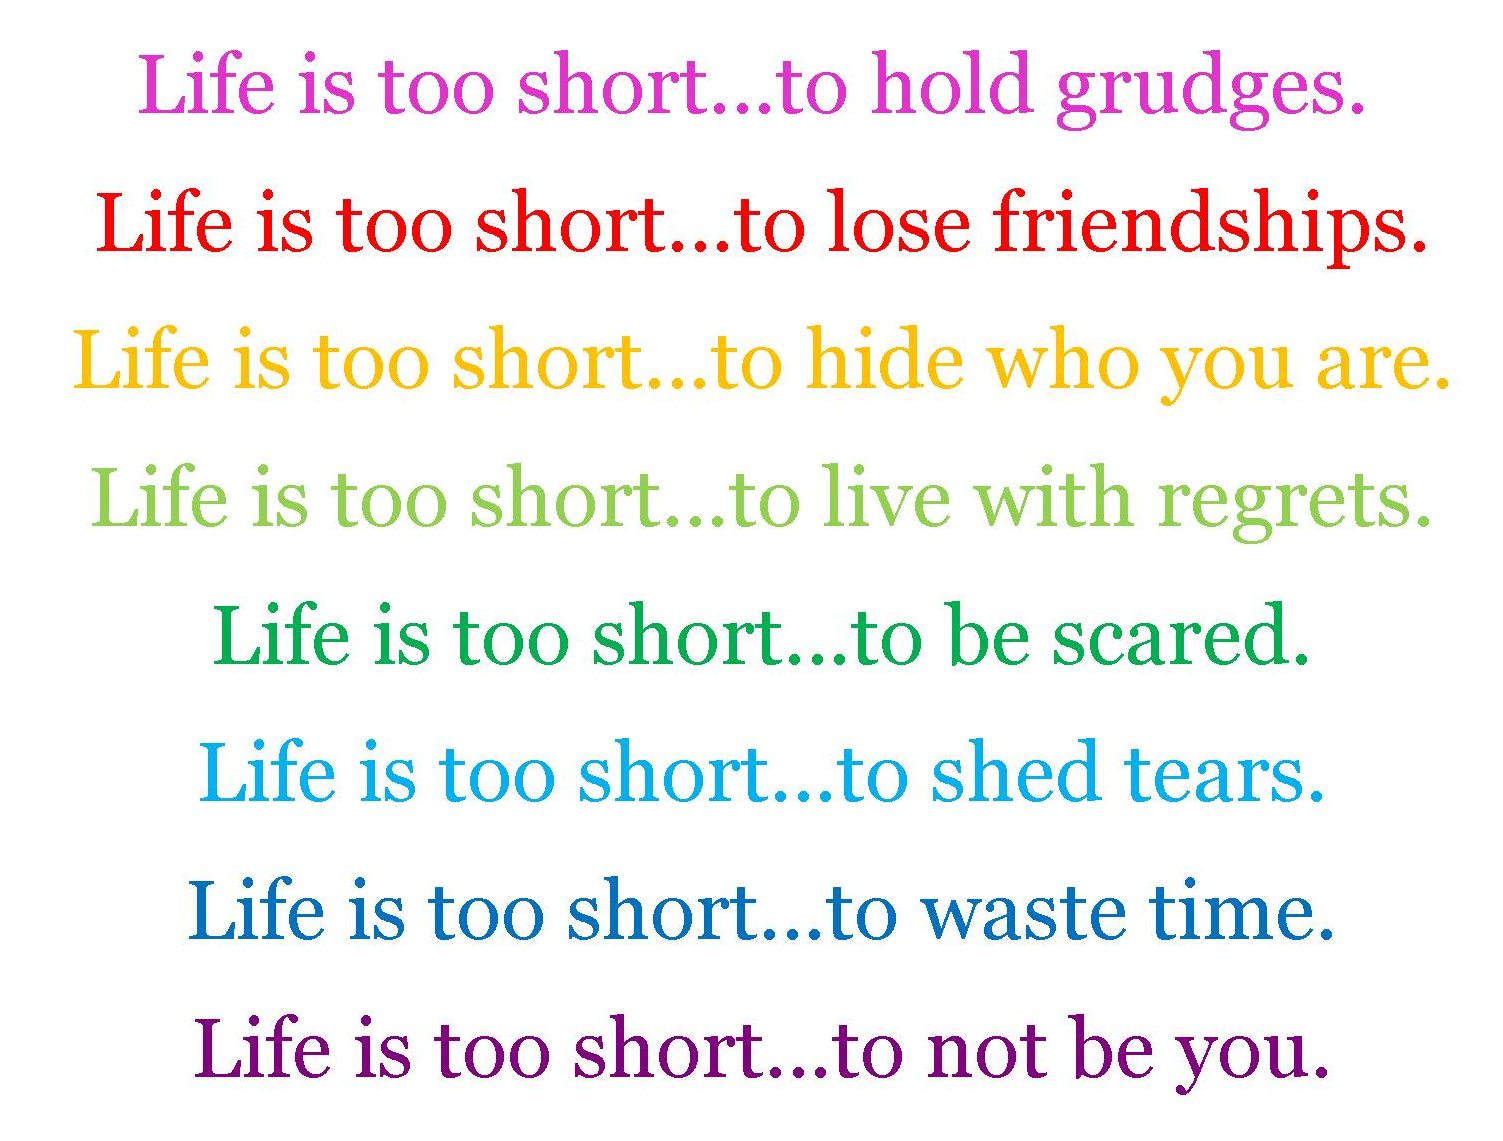 Life Is Too Short Image